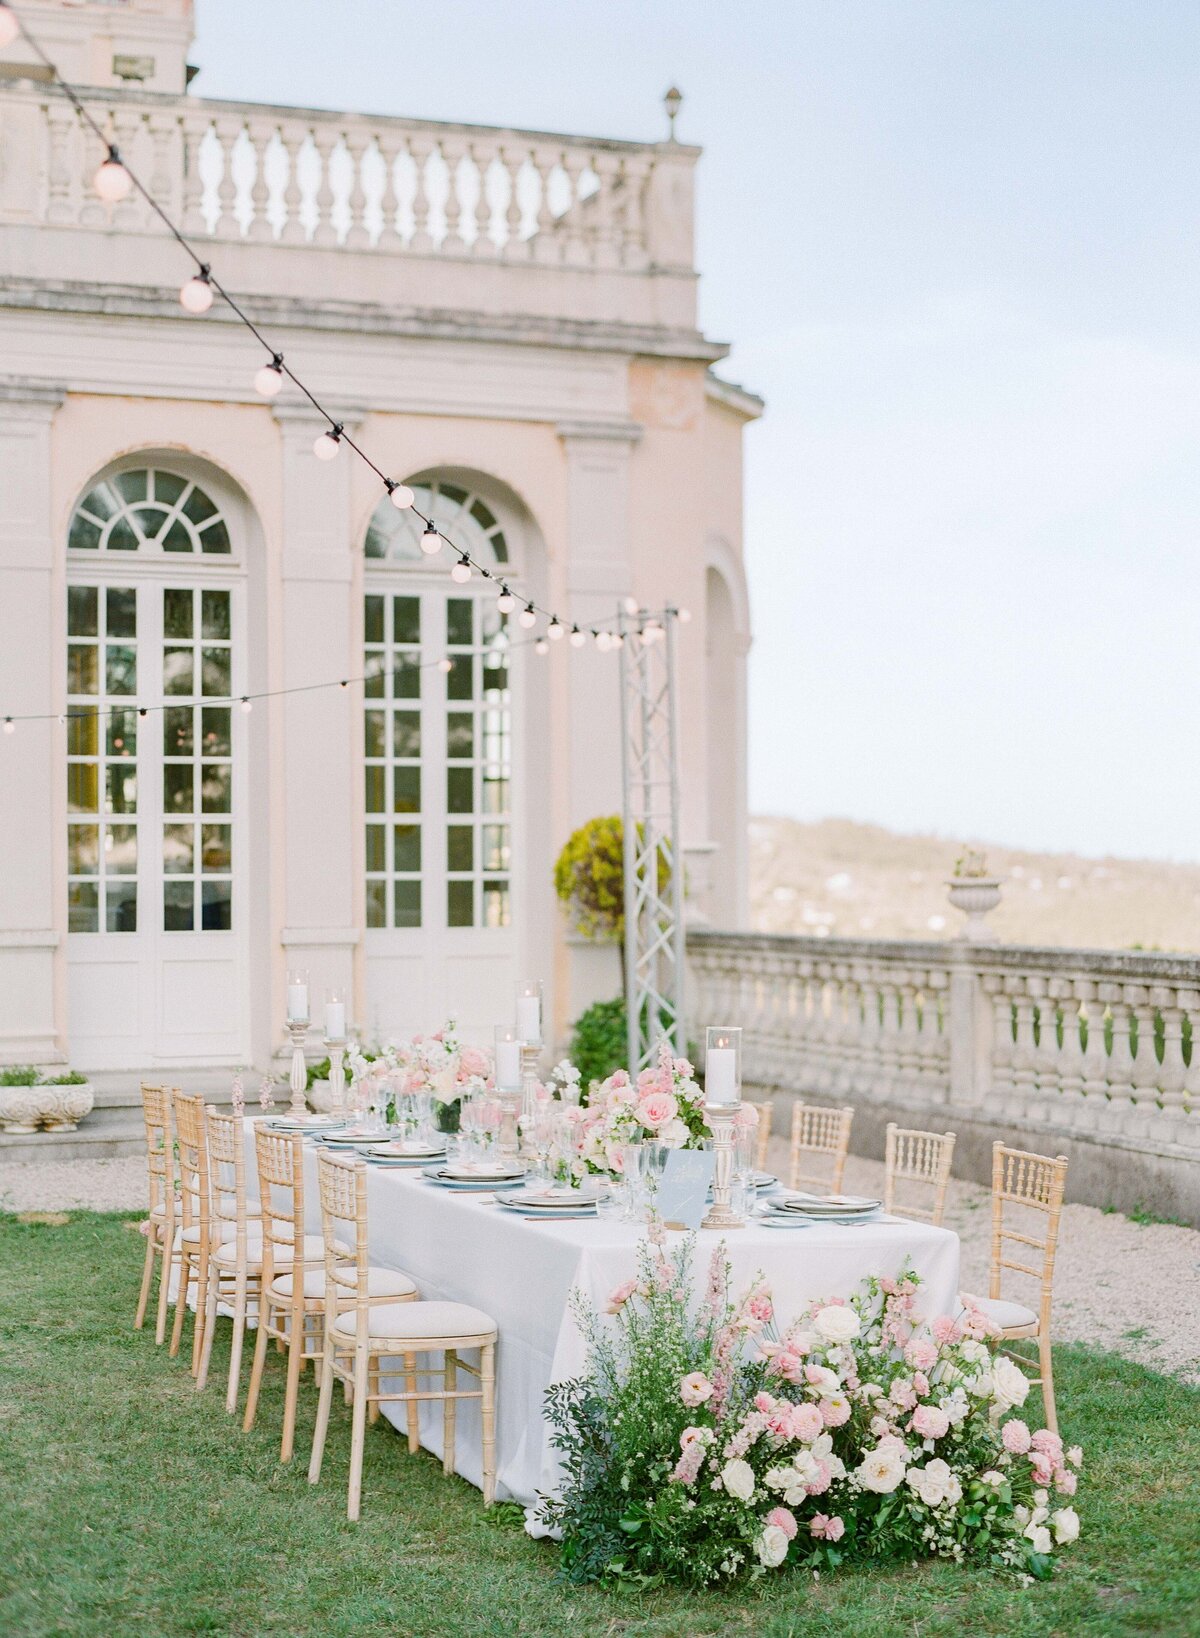 Jennifer Fox Weddings English speaking wedding planning & design agency in France crafting refined and bespoke weddings and celebrations Provence, Paris and destination Alyssa-Aaron-Molly-Carr-Photography-78